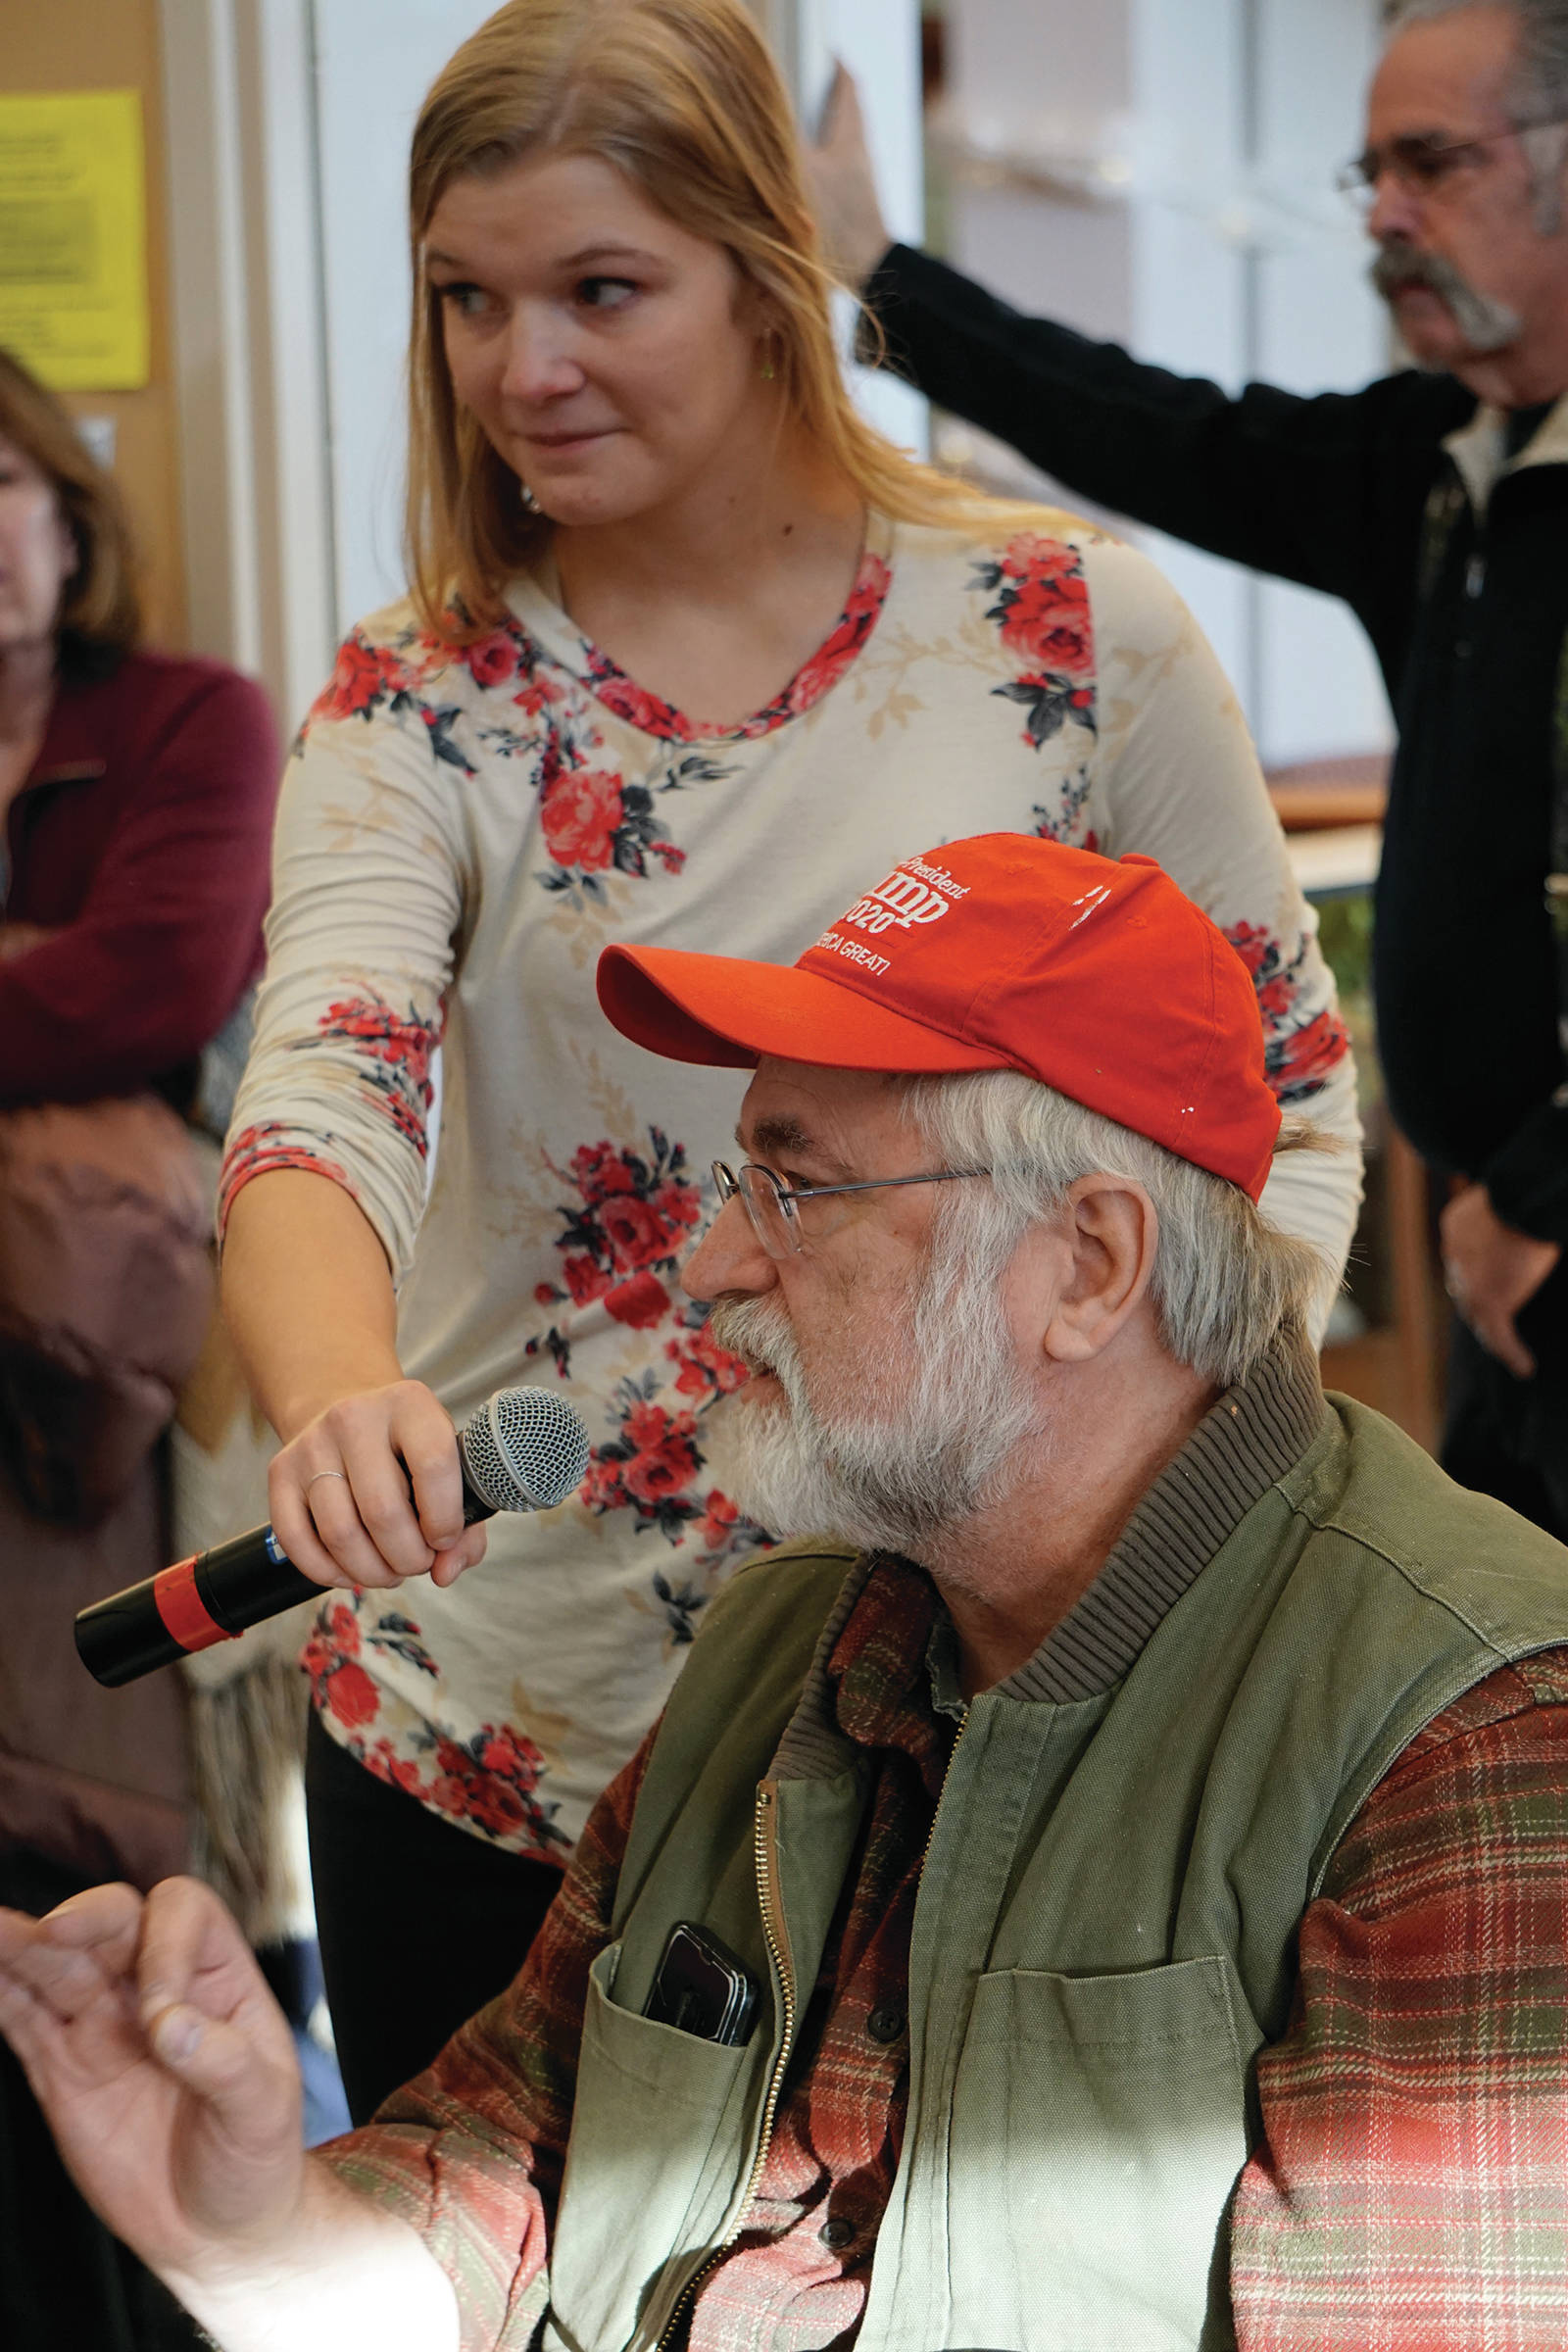 Randy Arndt asks Rep. Sarah Vance, R-Homer, a question at a town hall last Saturday, Jan. 11, 2020, at the Kachemak Bay Campus in Homer, Alaska. Legislative aide Lauren Simpson holds the microphone for Arndt. (Photo by Michael Armstrong/Homer News)